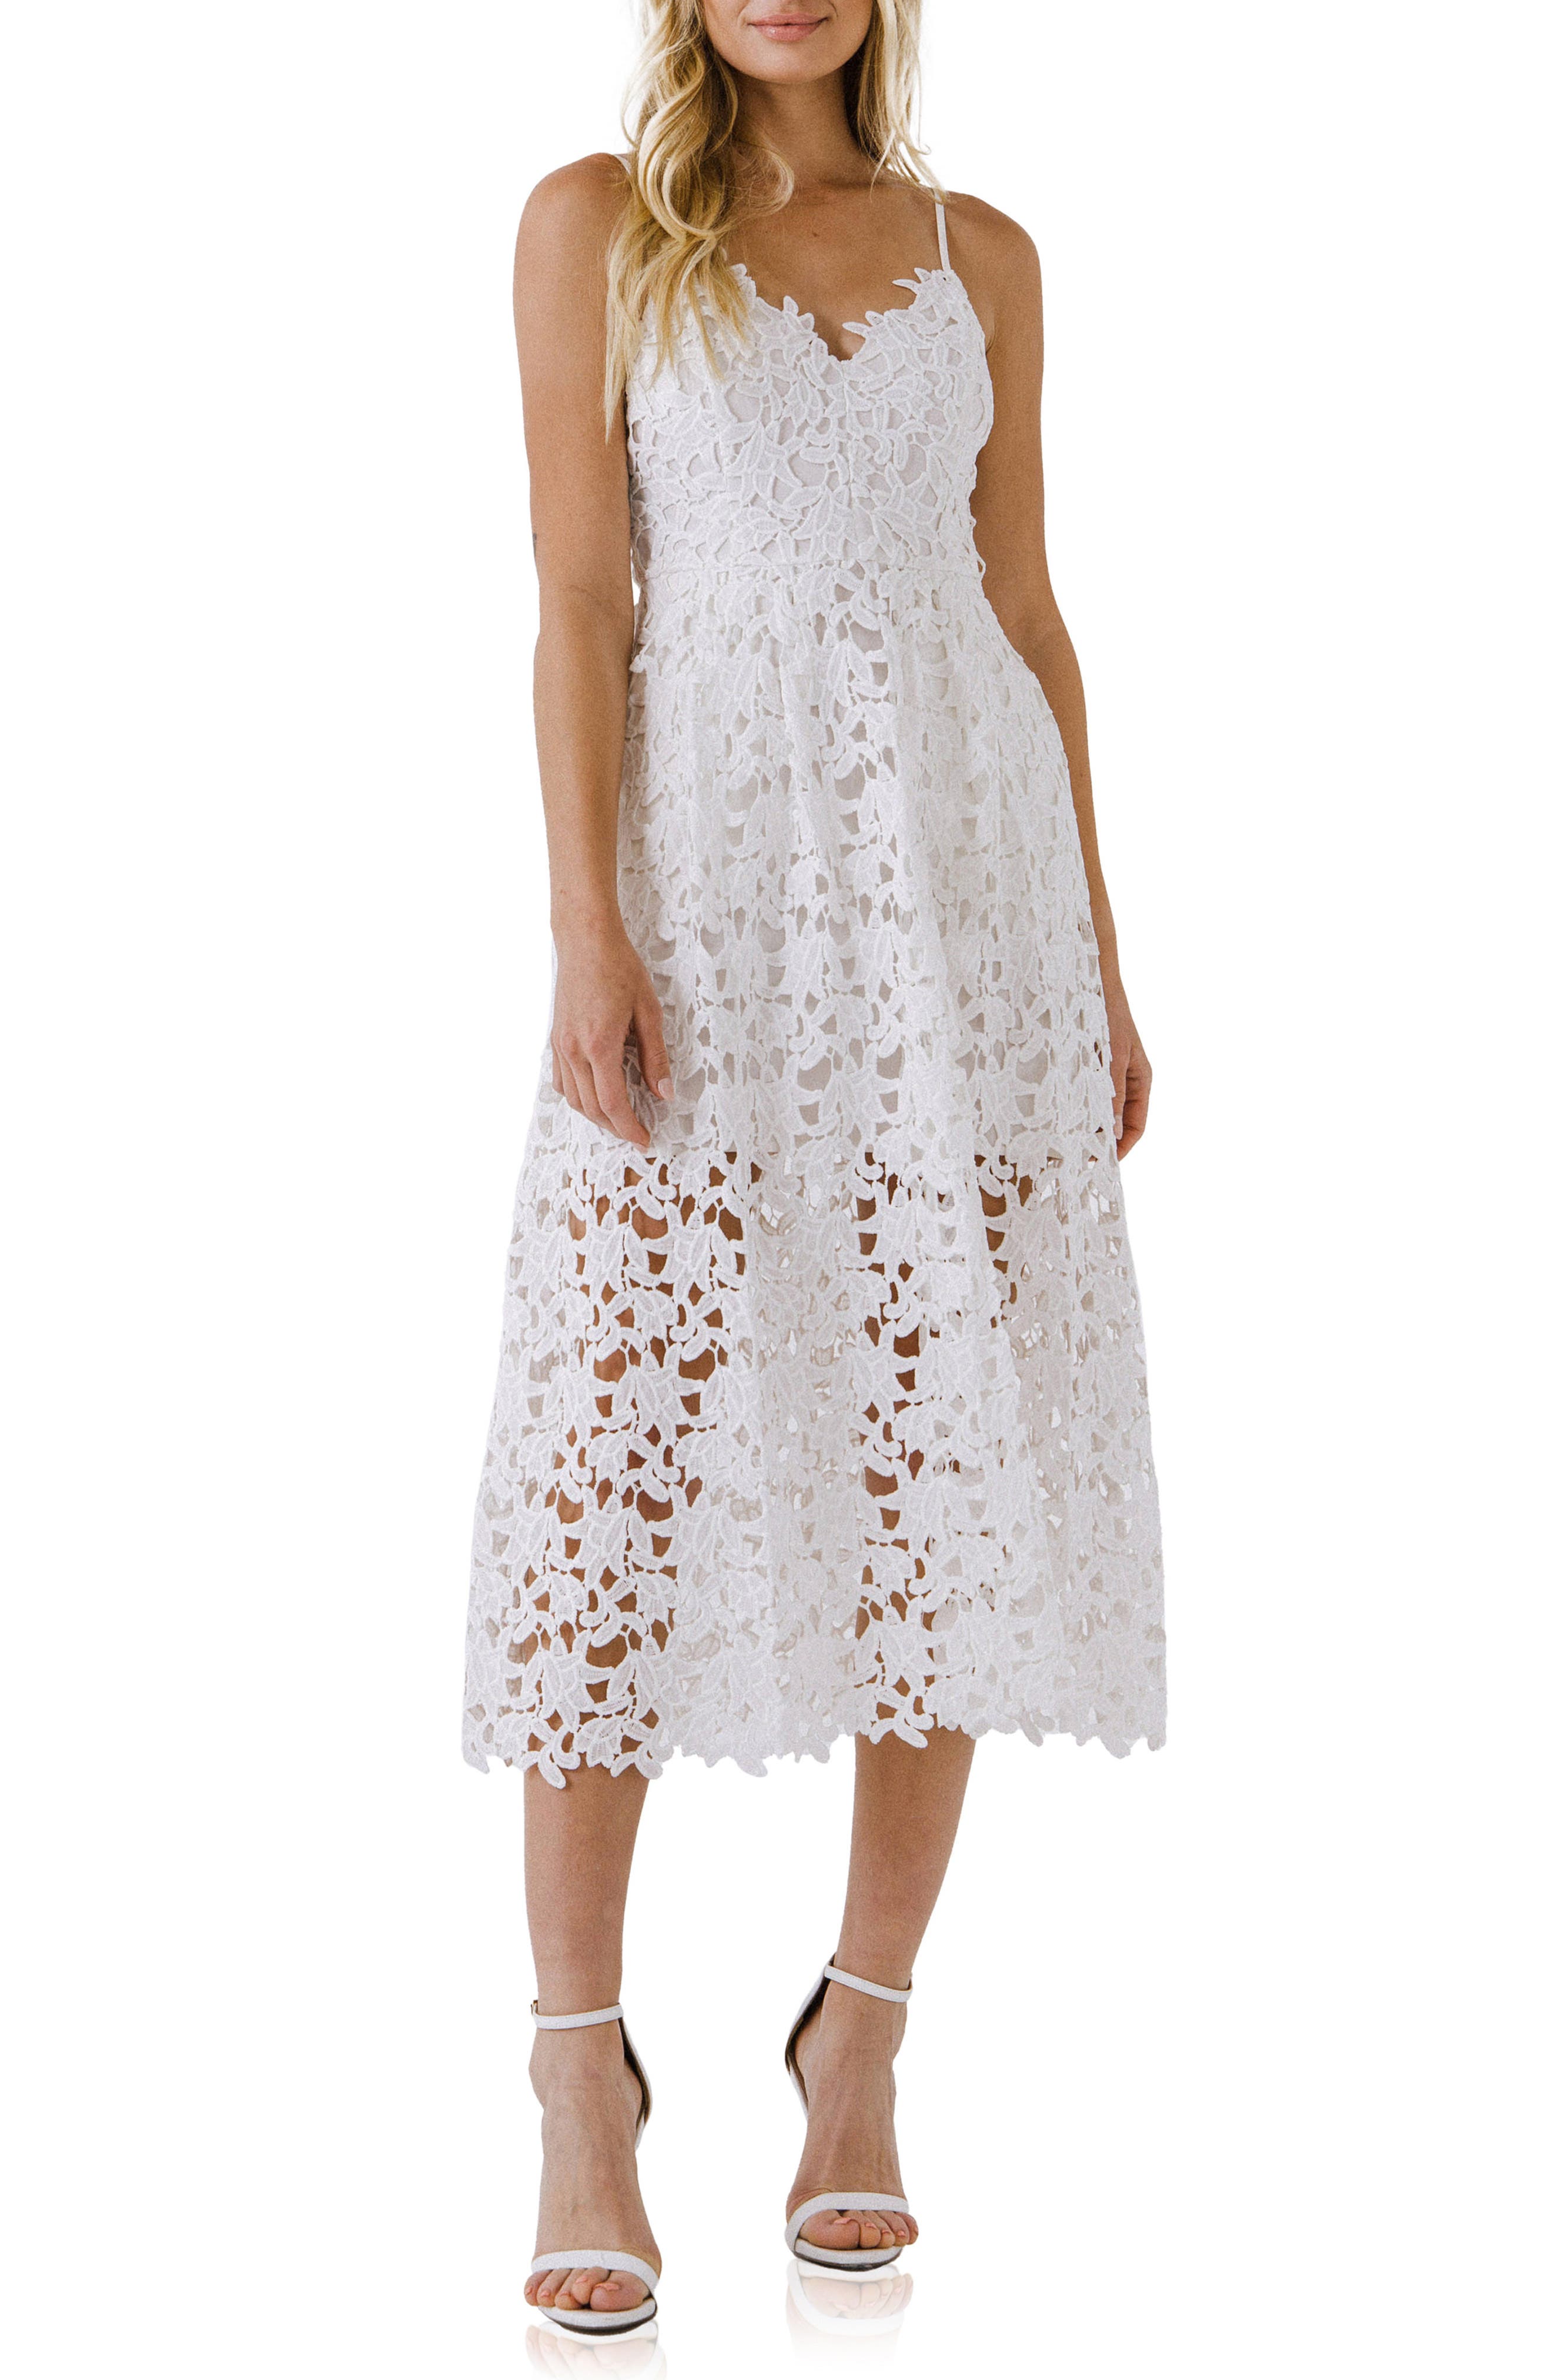 white lace dress | Nordstrom